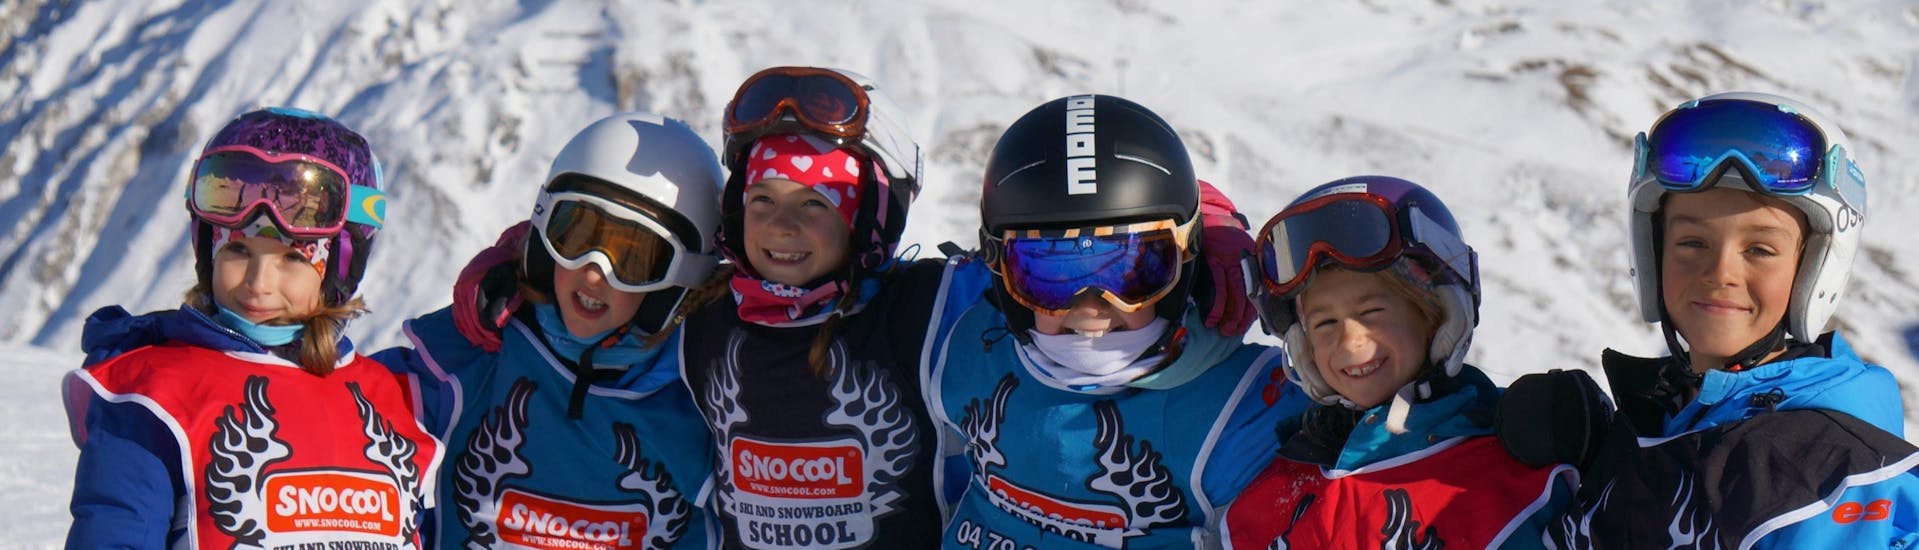 A great time on the slopes for the skiers of the Snocool max 6 kids ski lessons in Tignes.